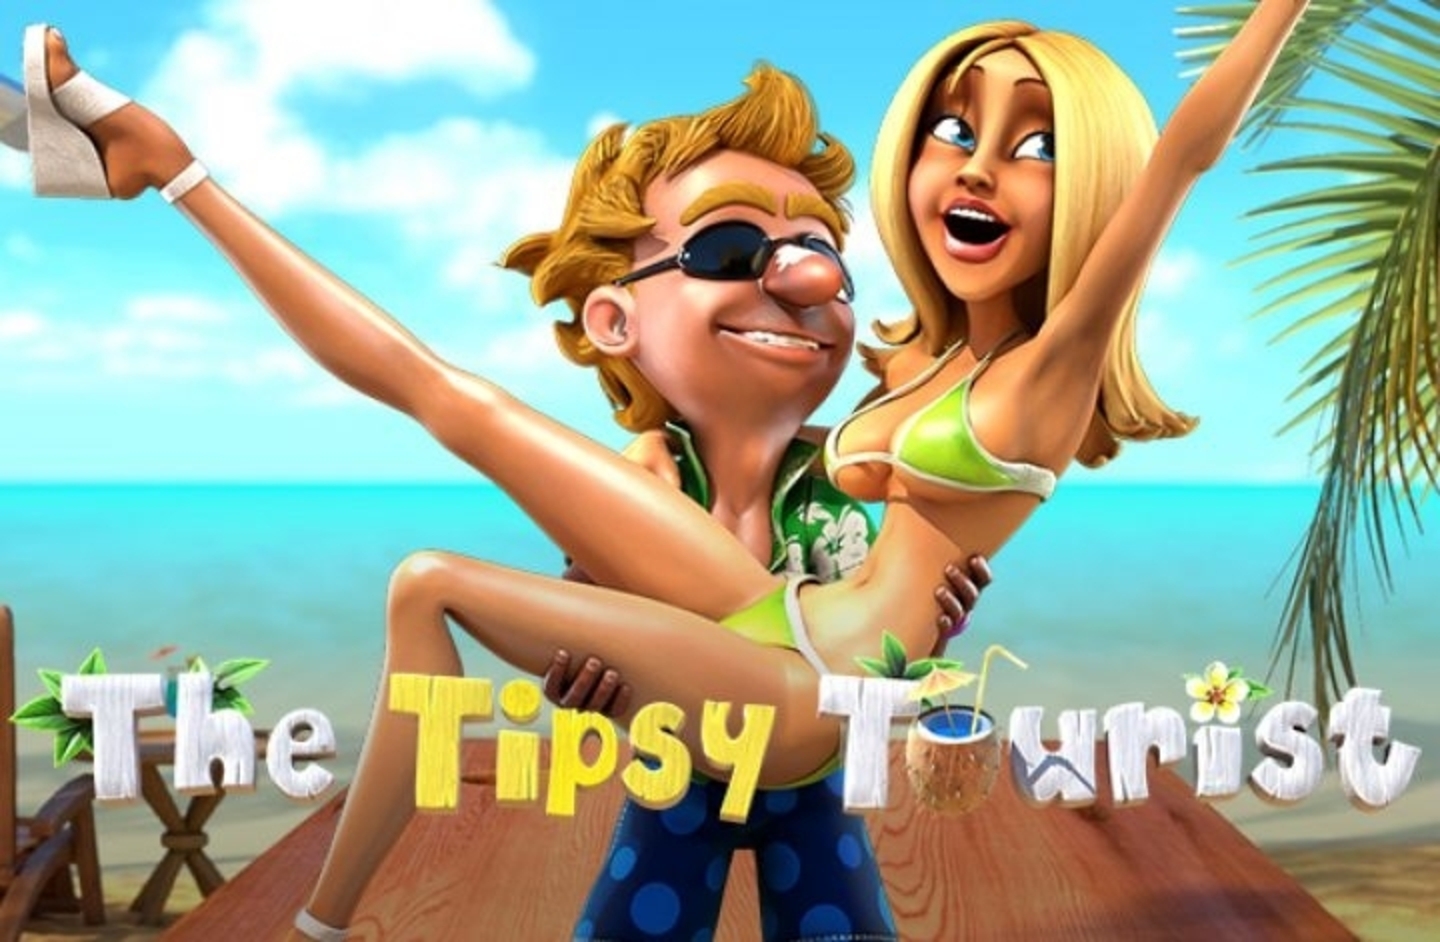 The The Tipsy Tourist Online Slot Demo Game by Betsoft